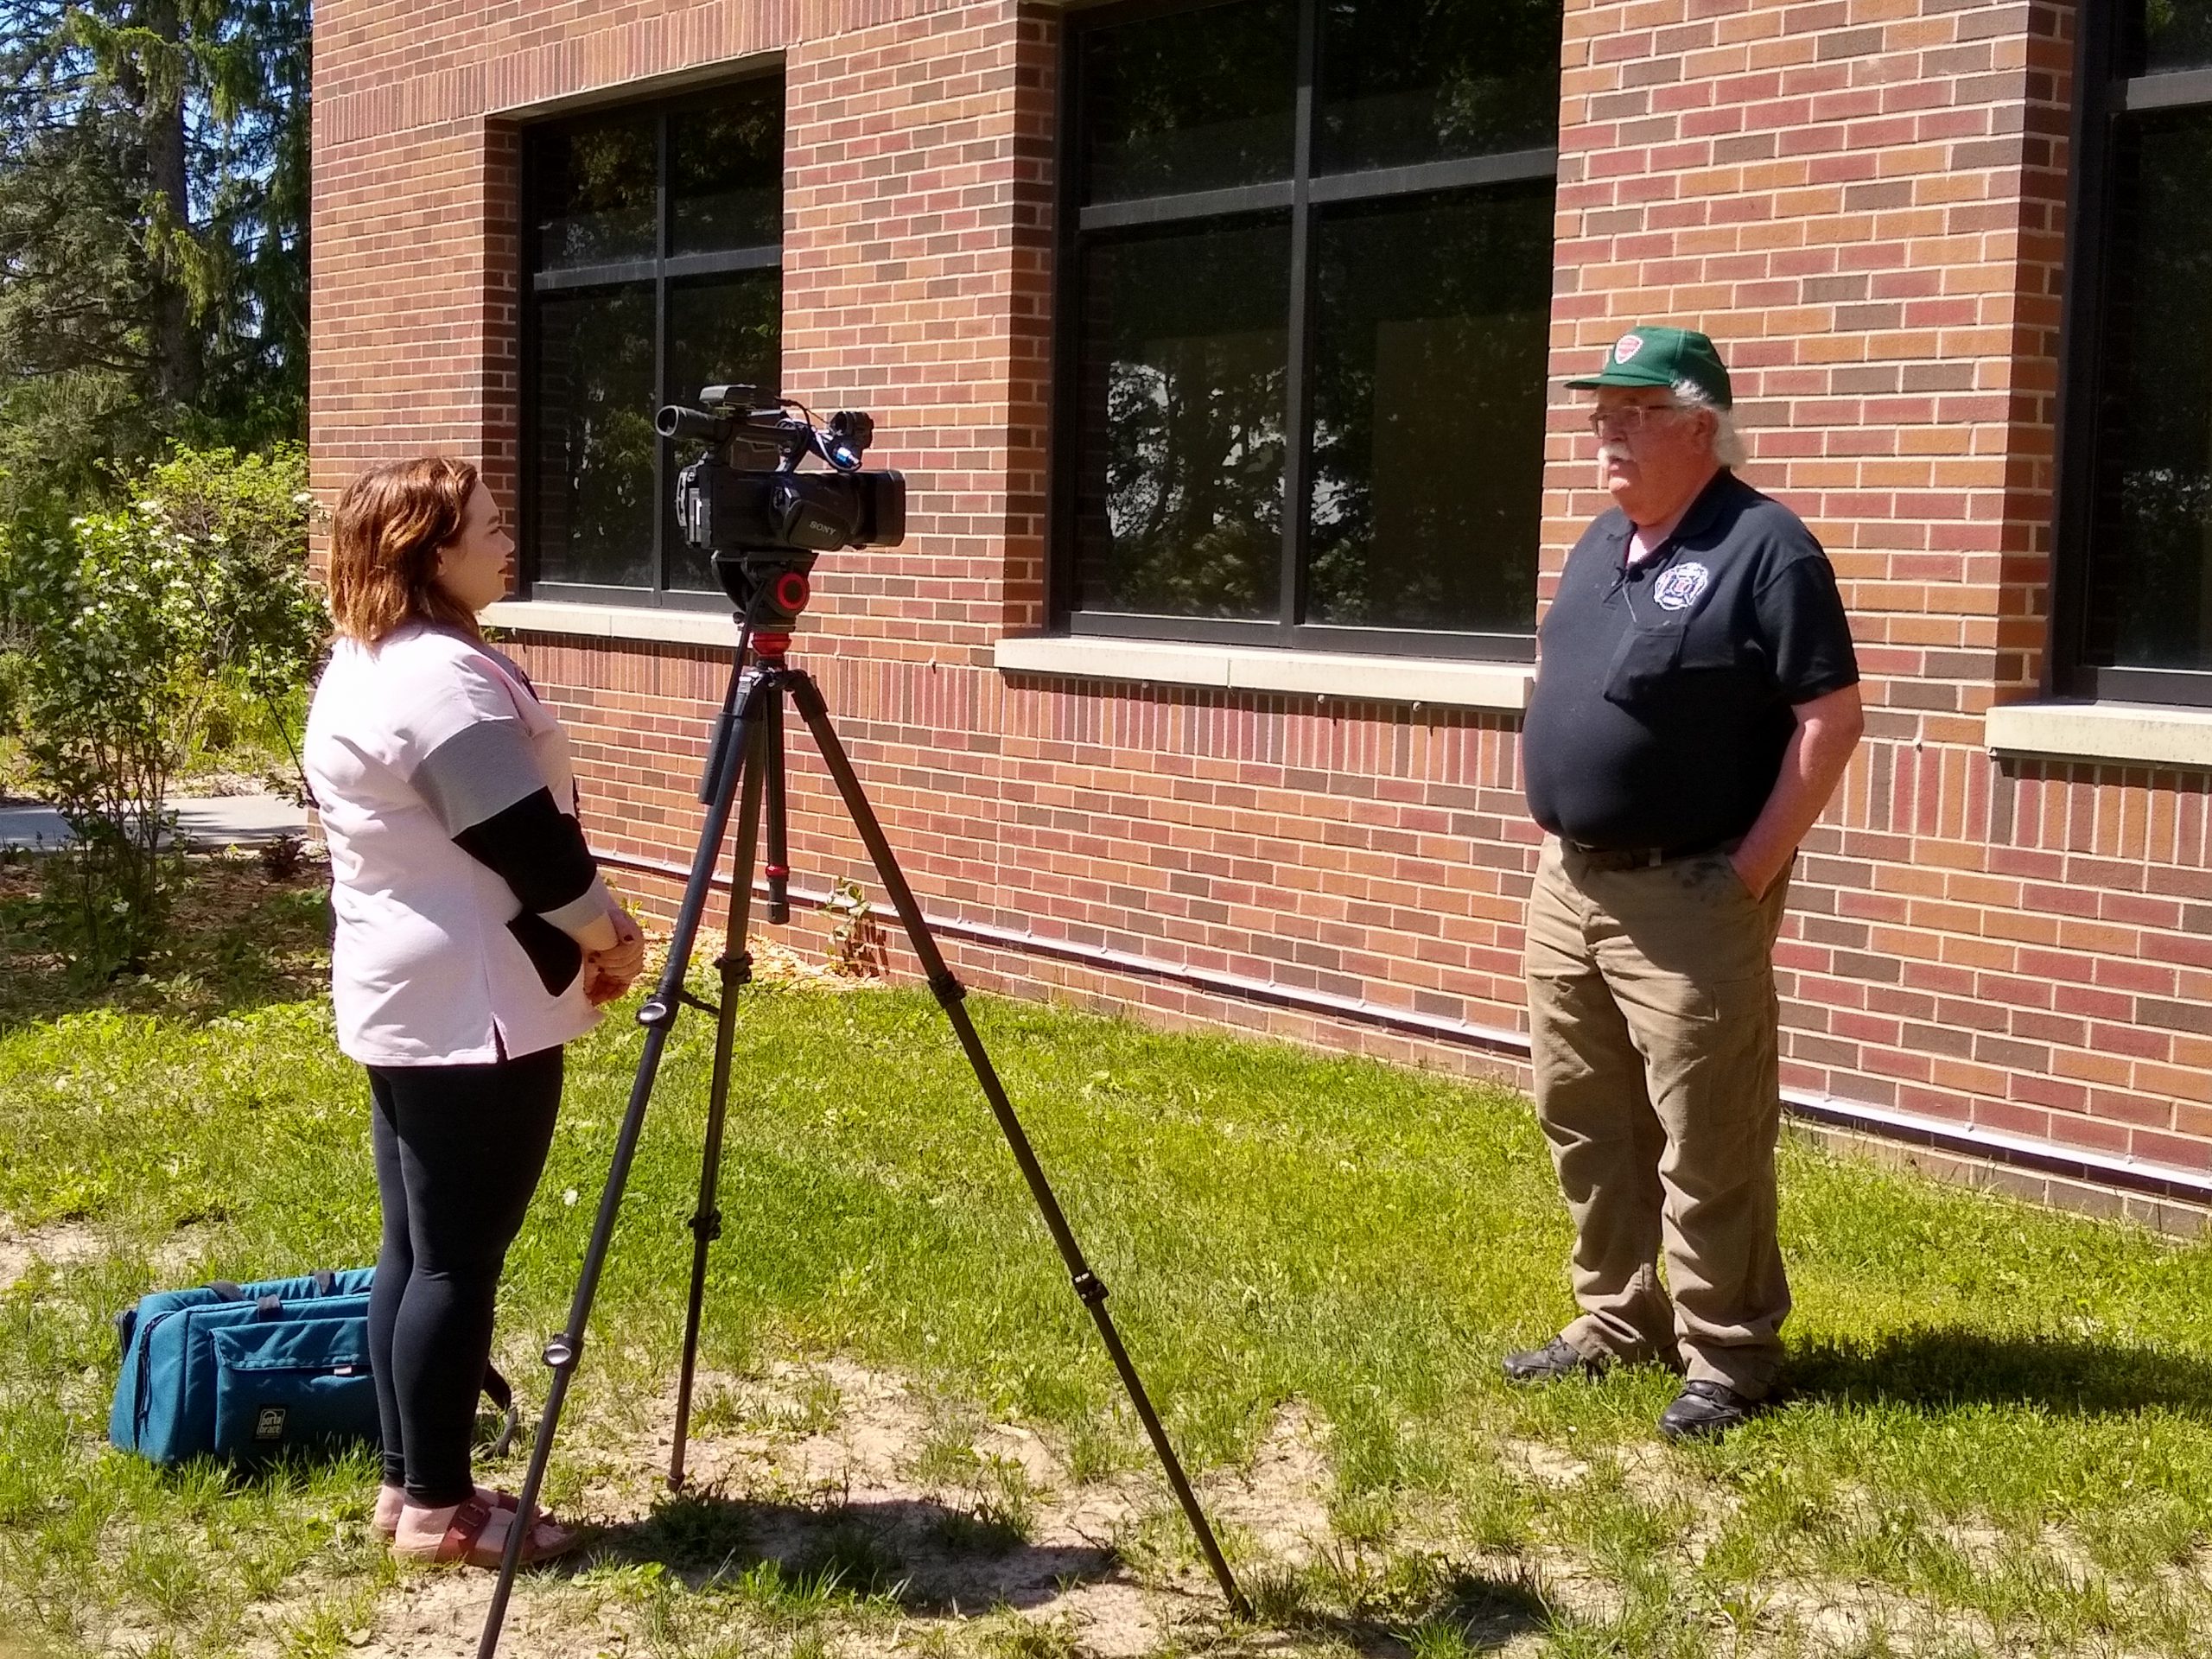 Reporter with a camer interviews a man in a dark shirt and green hat.